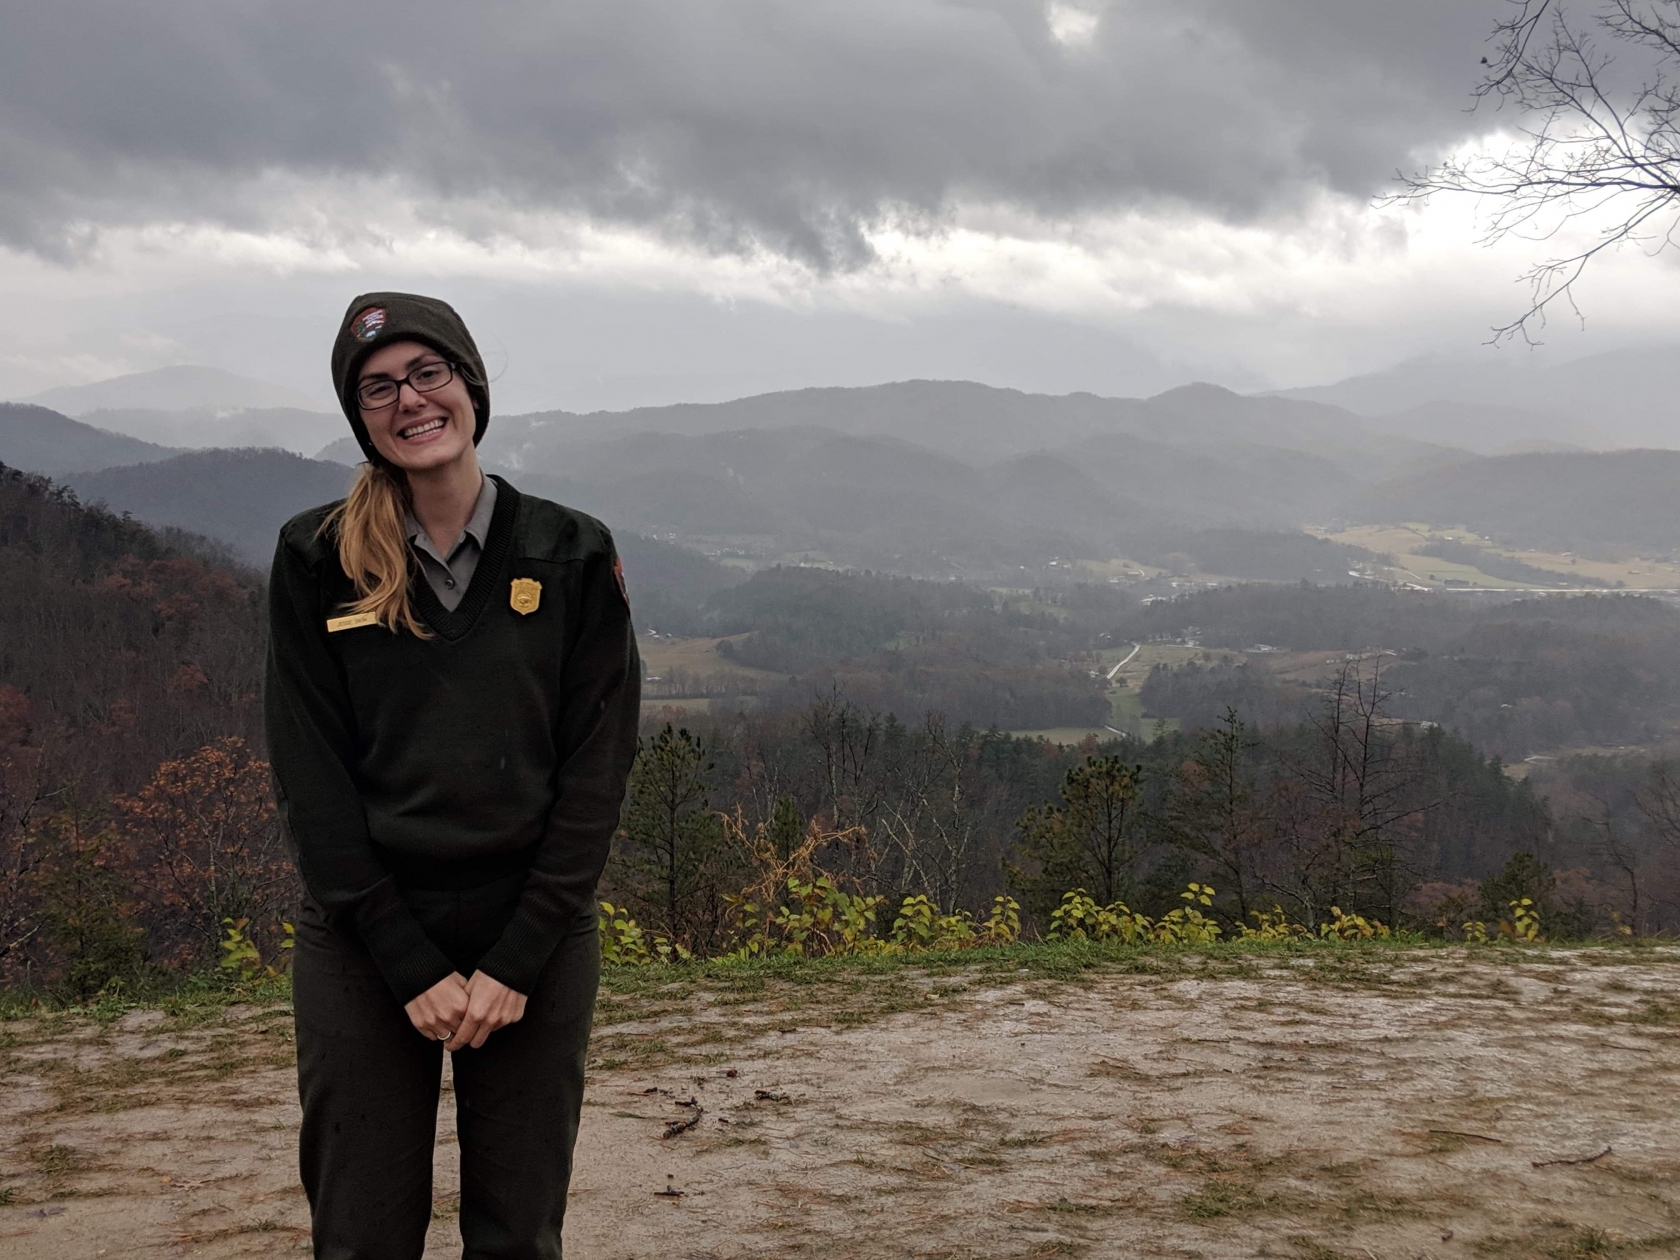 Jessie Snow, in NPS uniform, smiles at the camera. She stands in front of a vista of the Great Smoky Mountains